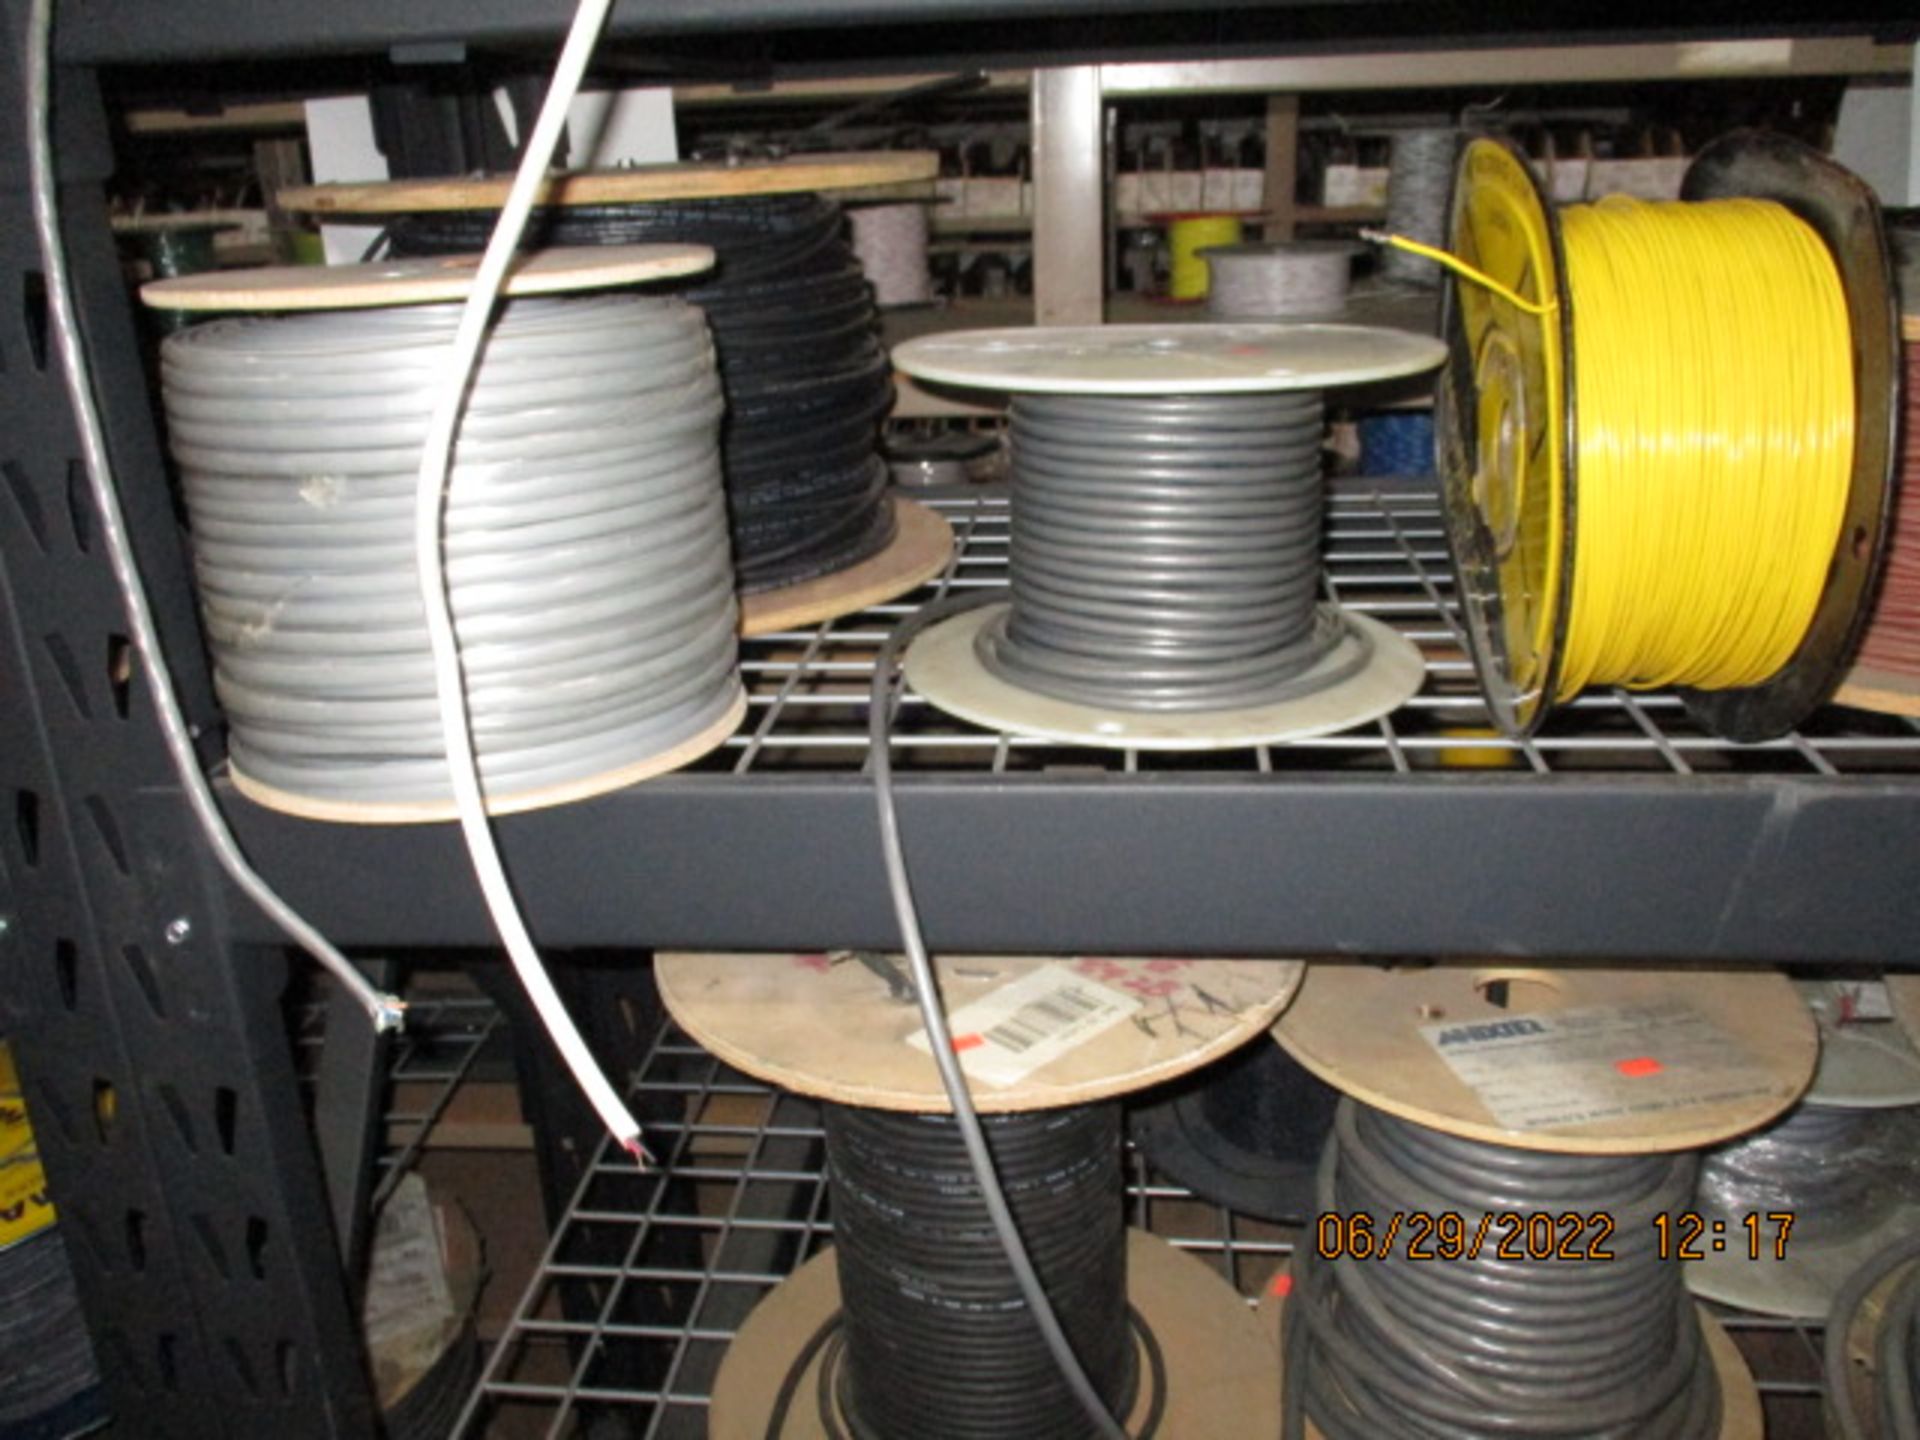 CONTENTS OF SHELVING UNIT CONSISTING OF ASSORTMENT OF CABLE/WIRE - Image 5 of 10